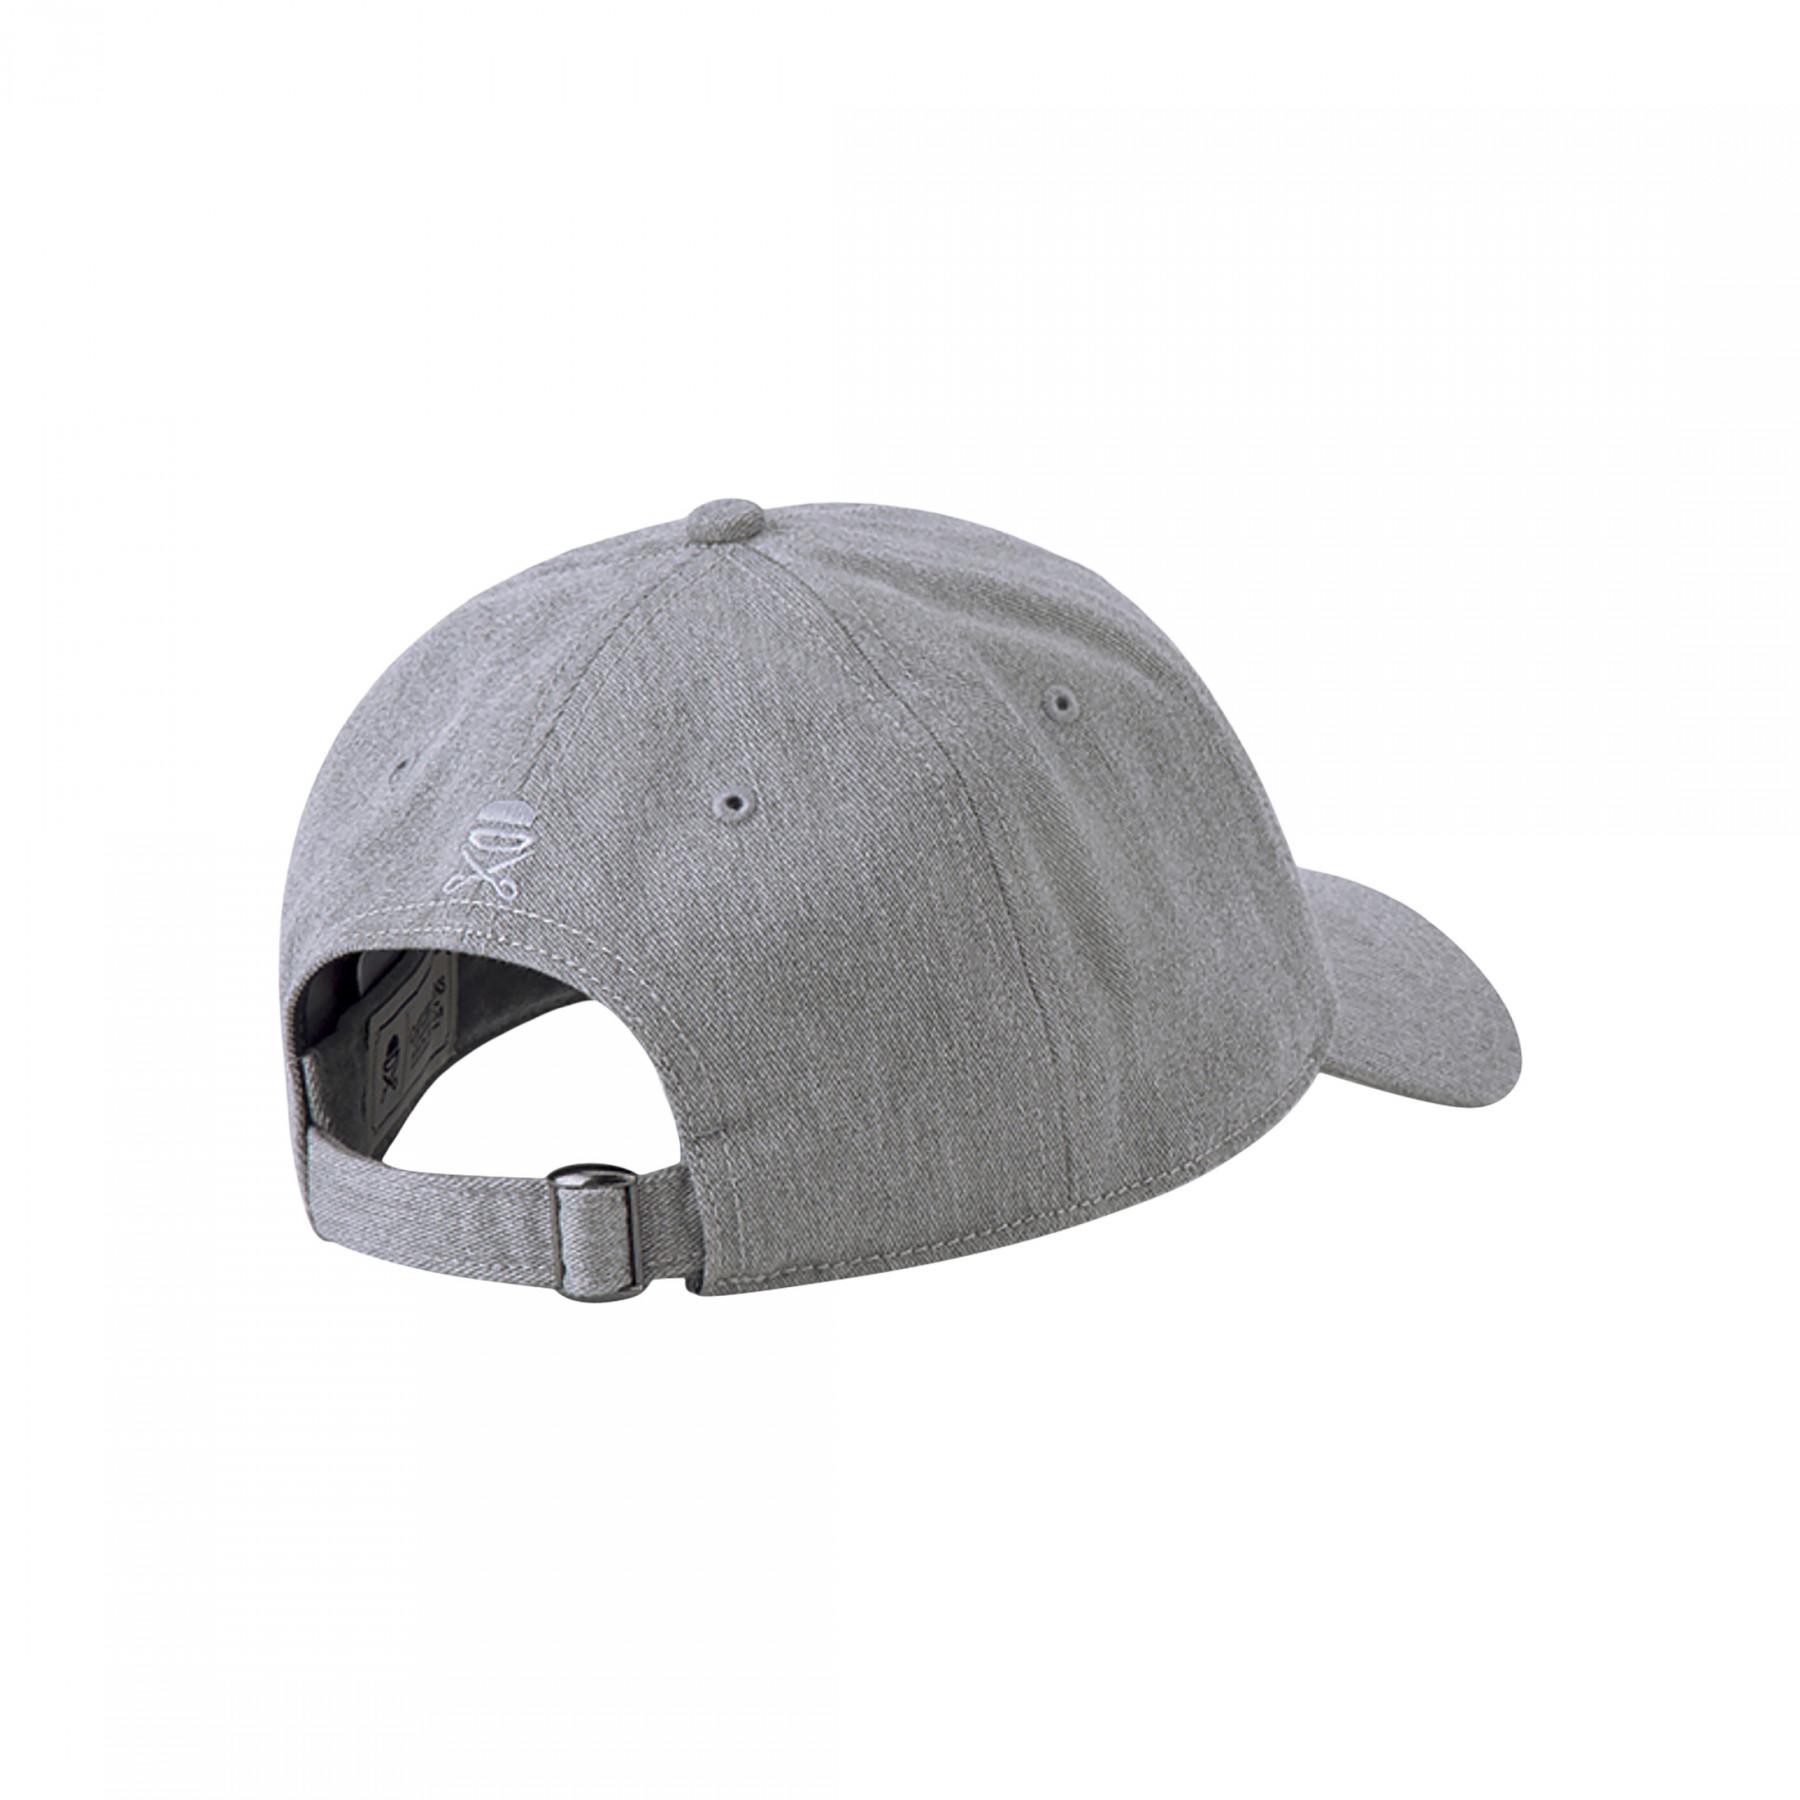 Cap Cayler & Sons wl mont mercy curved